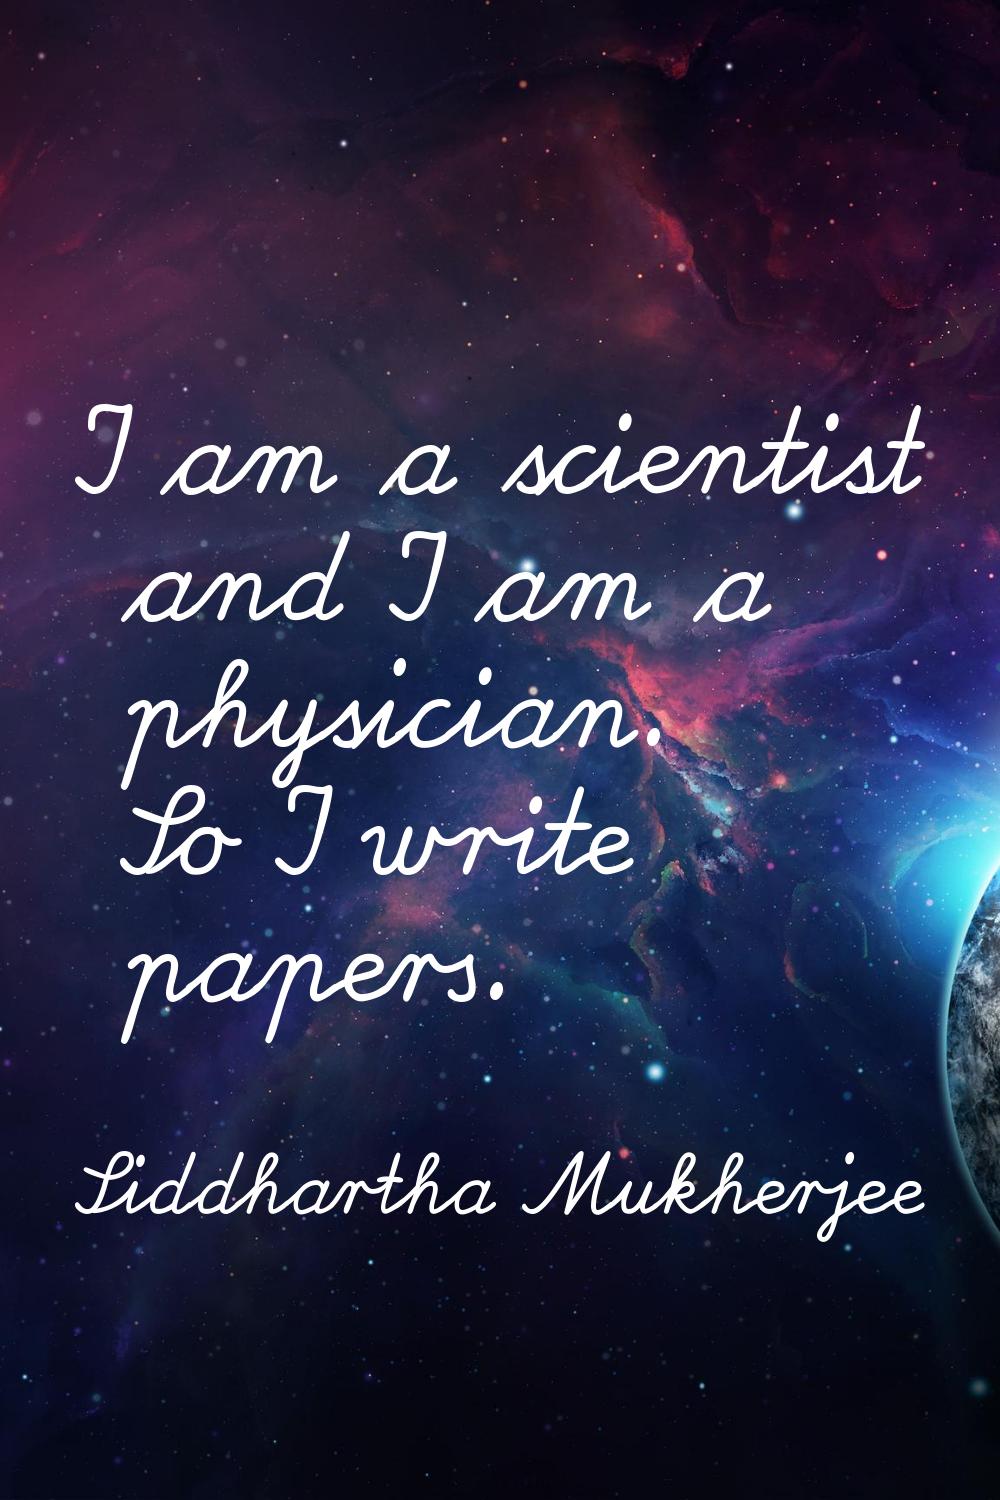 I am a scientist and I am a physician. So I write papers.